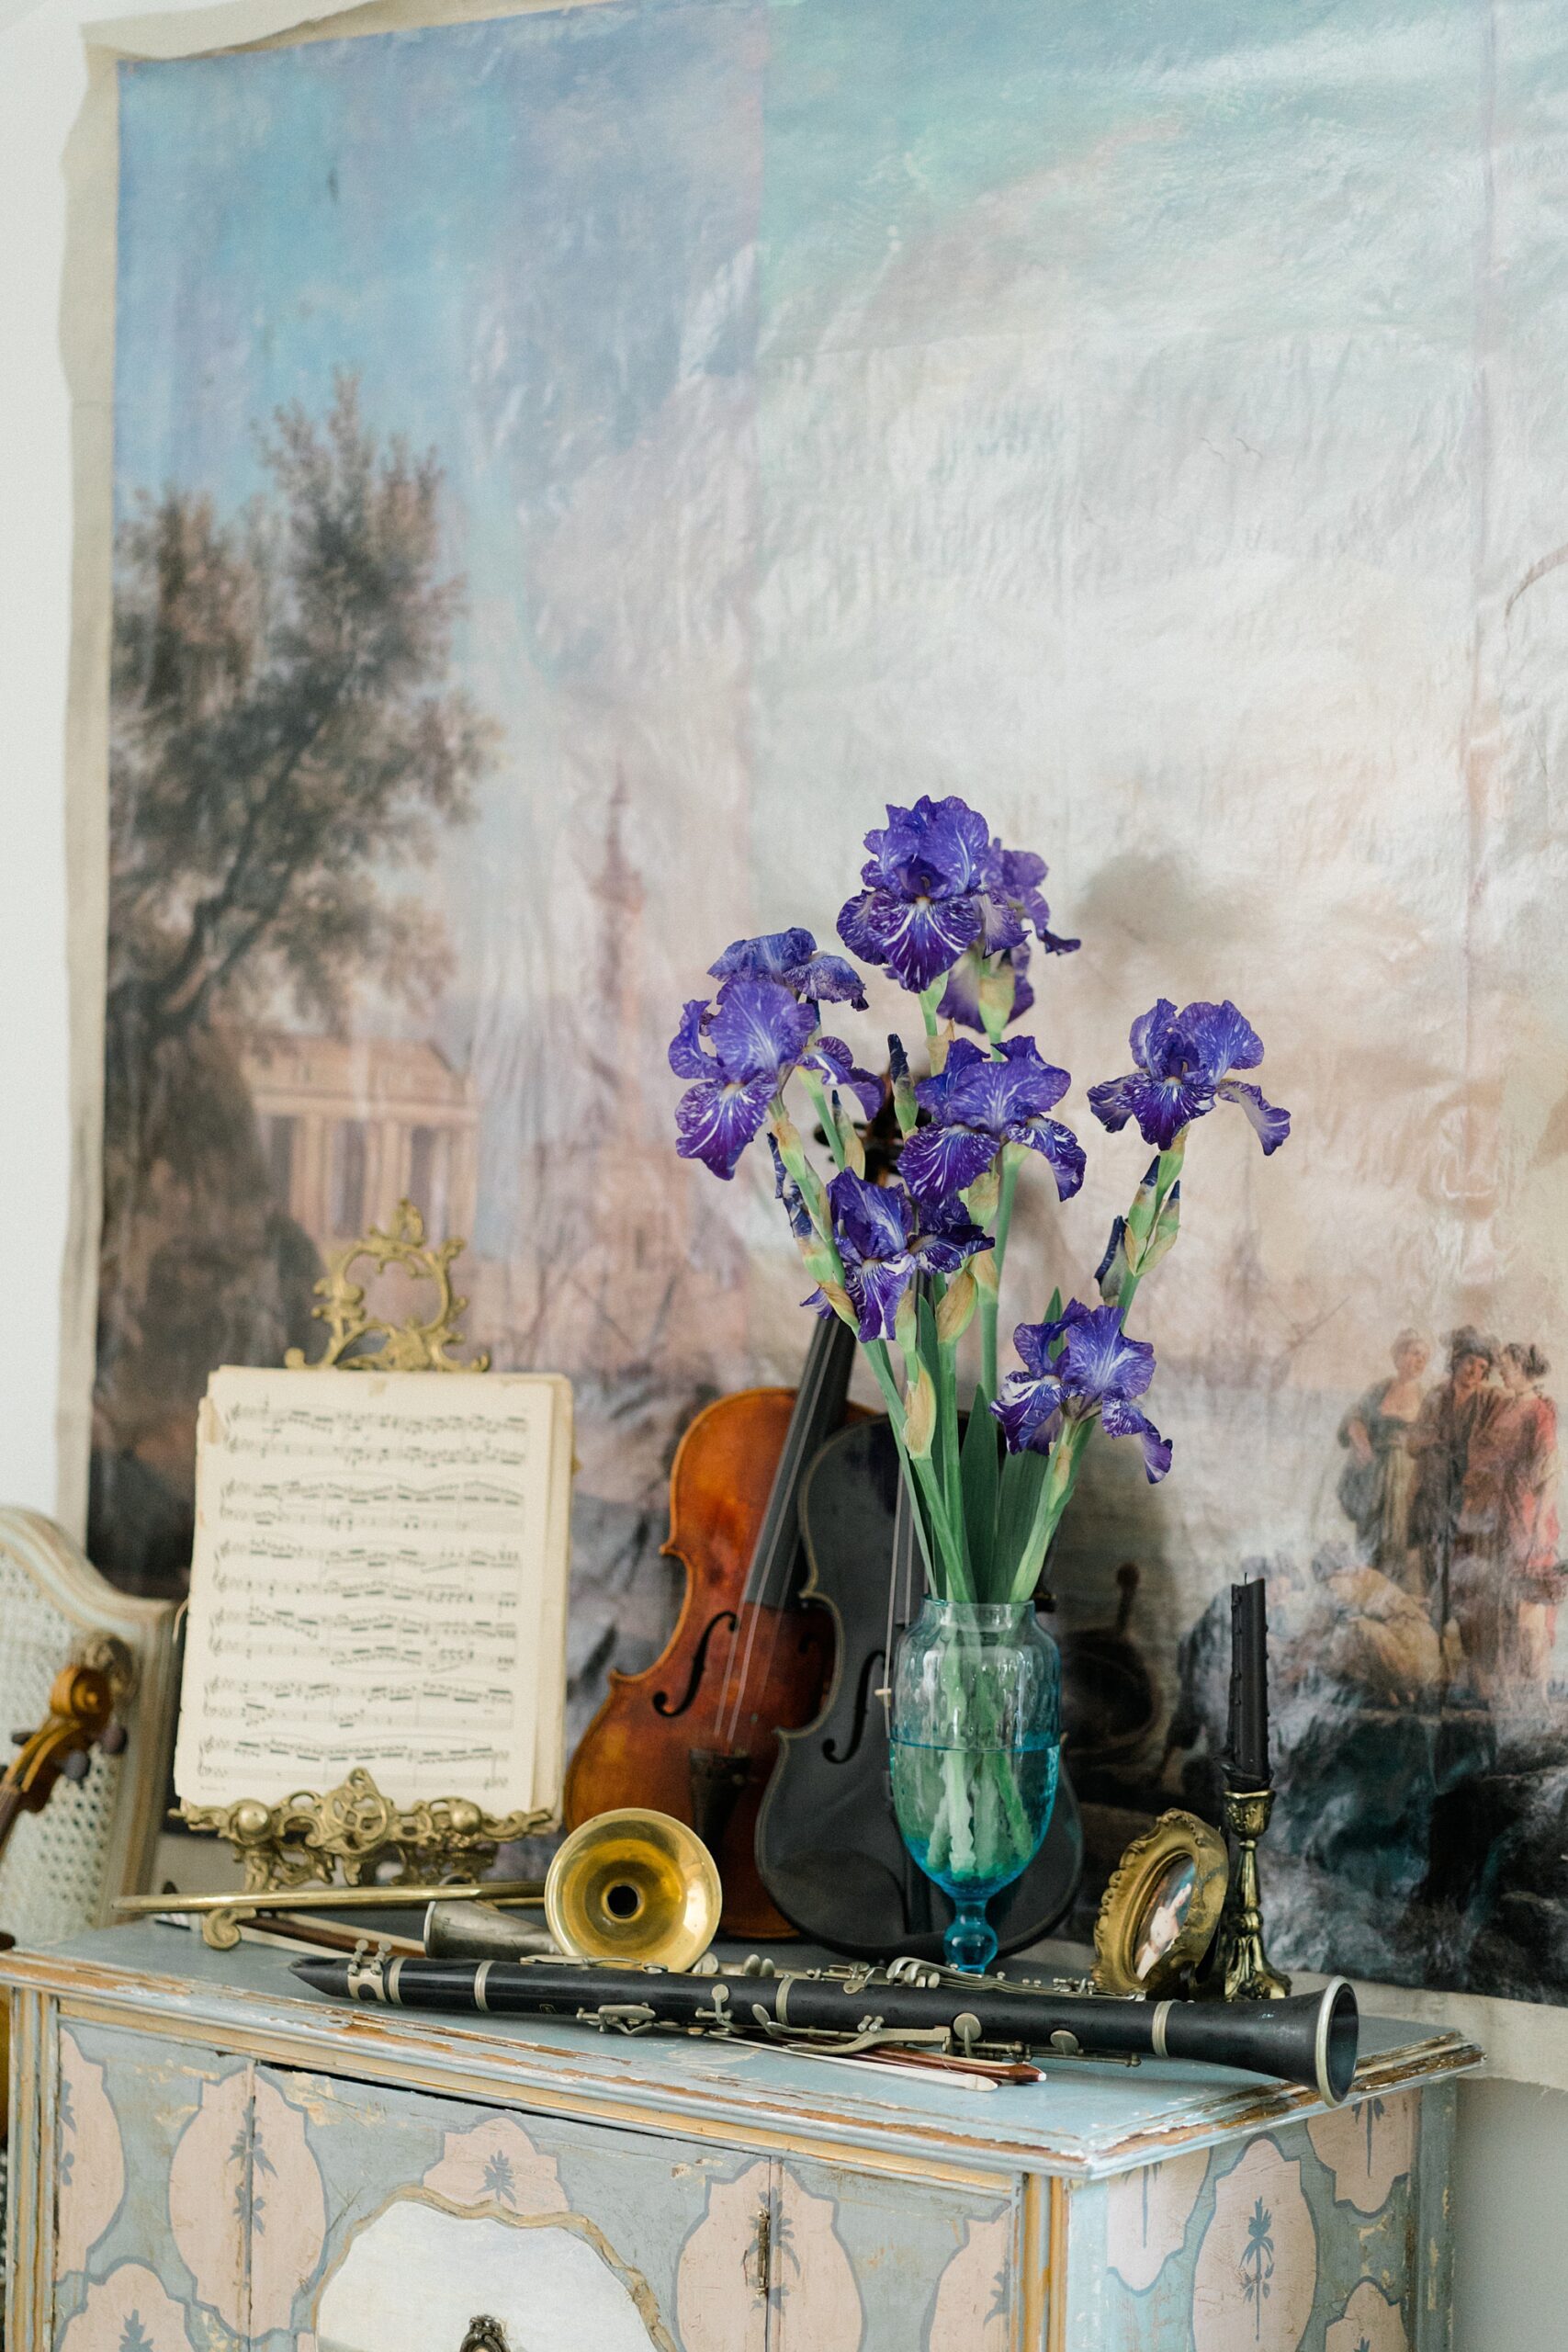 purple flowers in vase by musical instruments